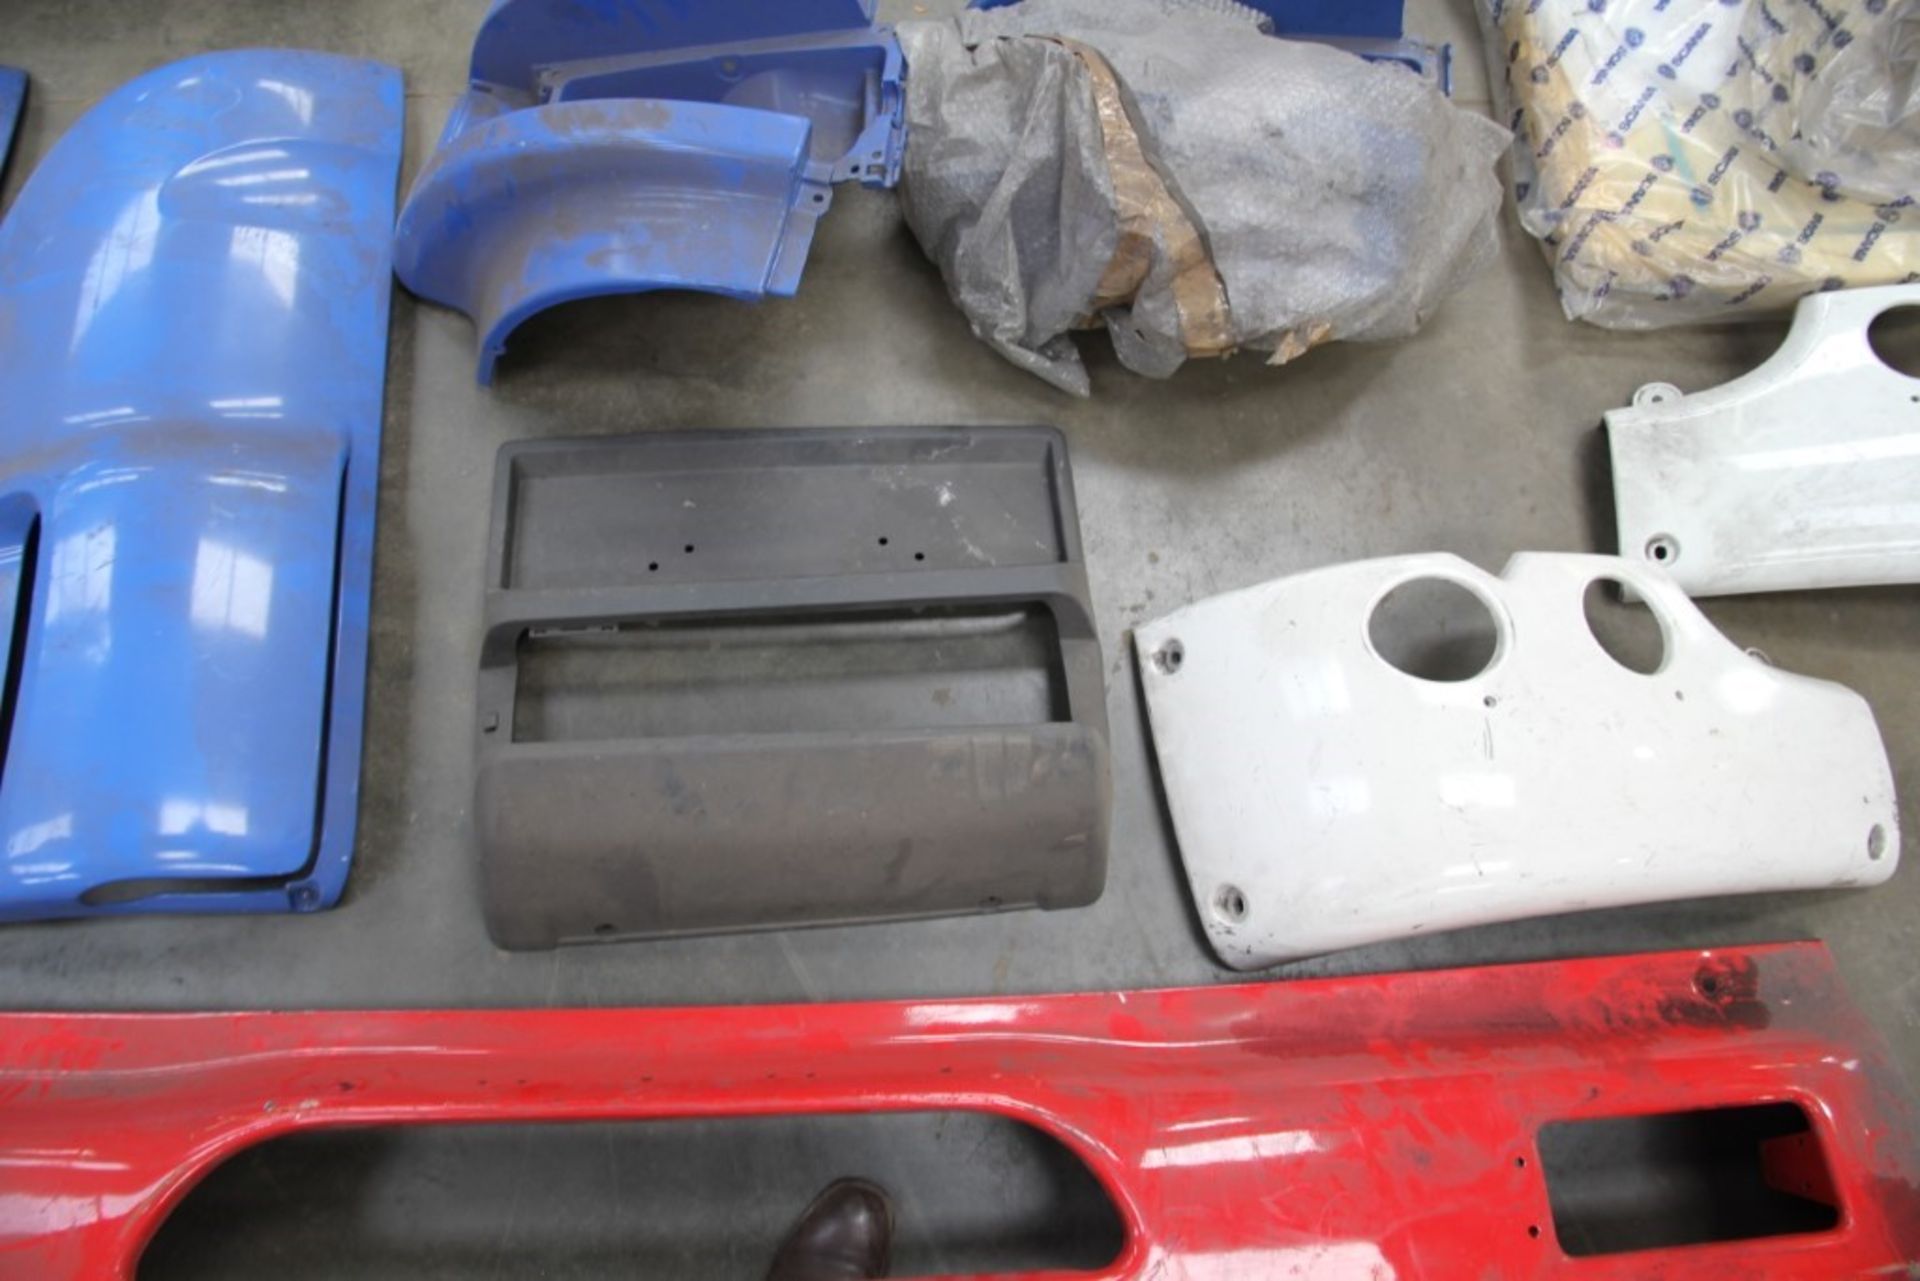 Scania Truck Parts (1 Pallet) - Image 8 of 10